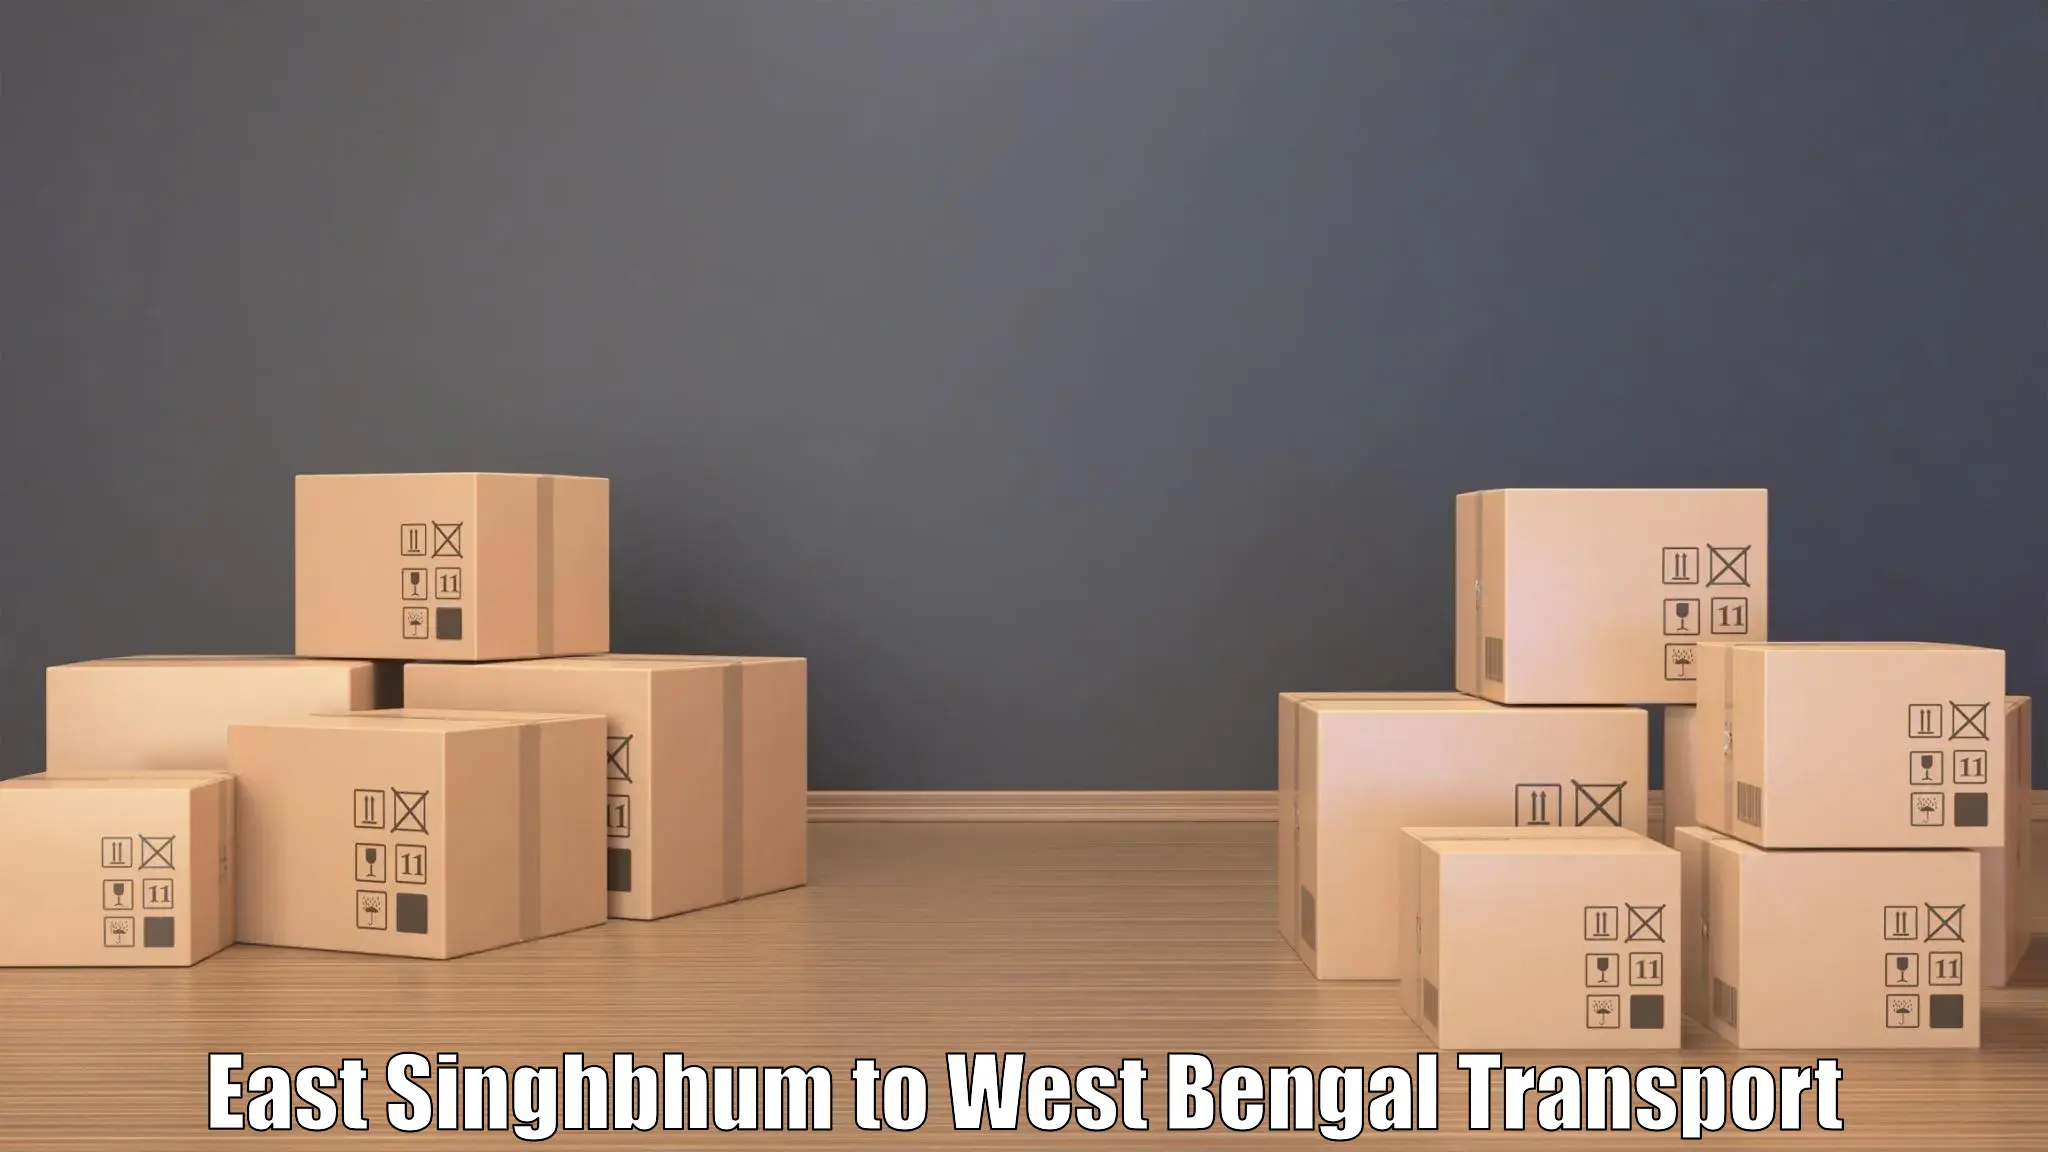 Truck transport companies in India East Singhbhum to Alipore